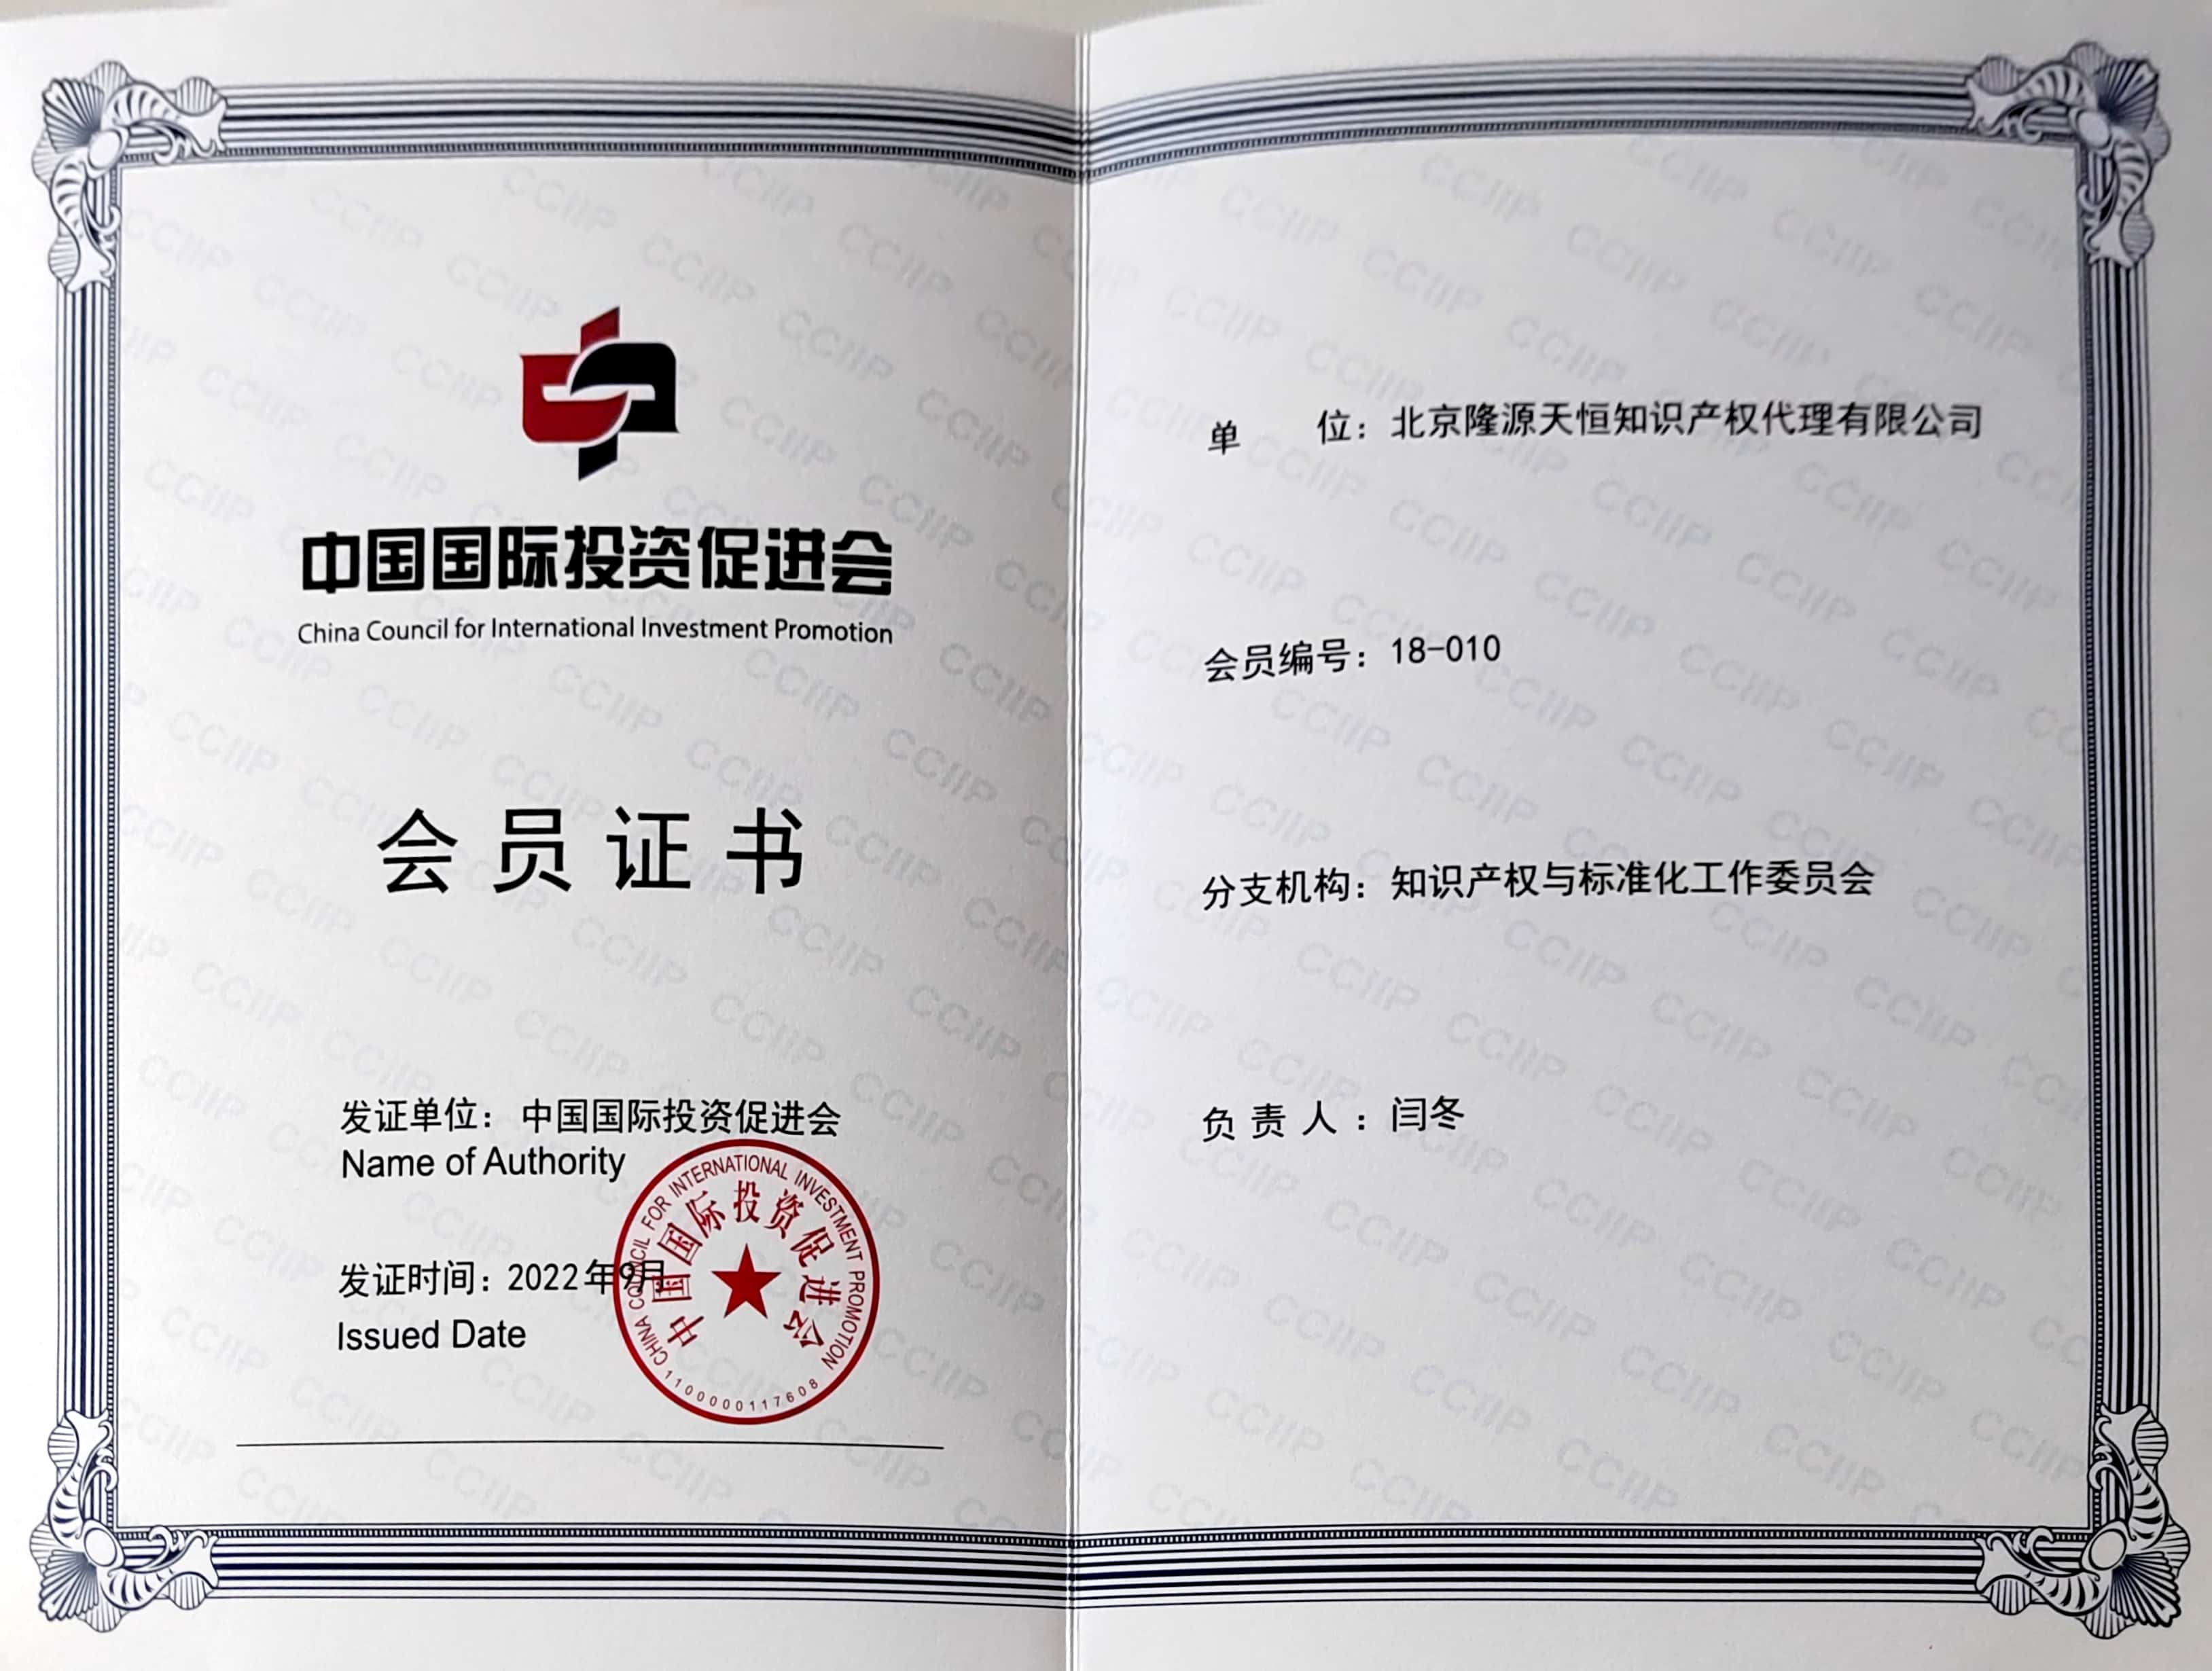 Membership Certificate of China Association for the Promotion of International Investment